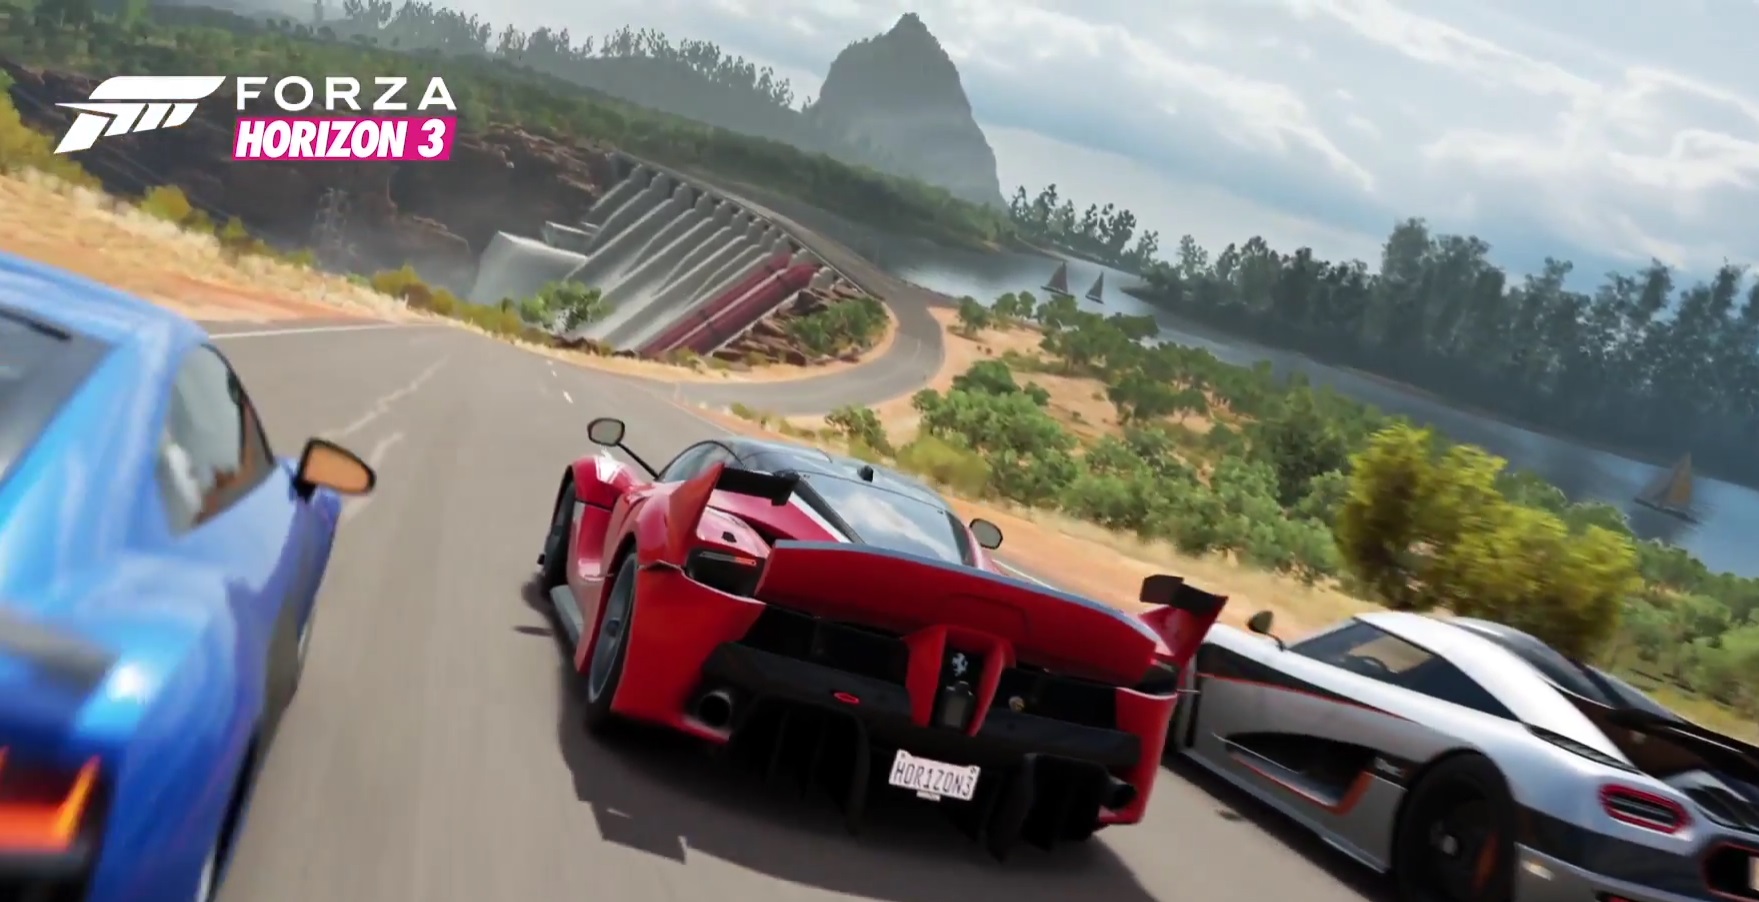 OFFICIAL LAUNCH TRAILER: ‘FORZA HORIZON 3’ IS ALMOST HERE! - Action A ...